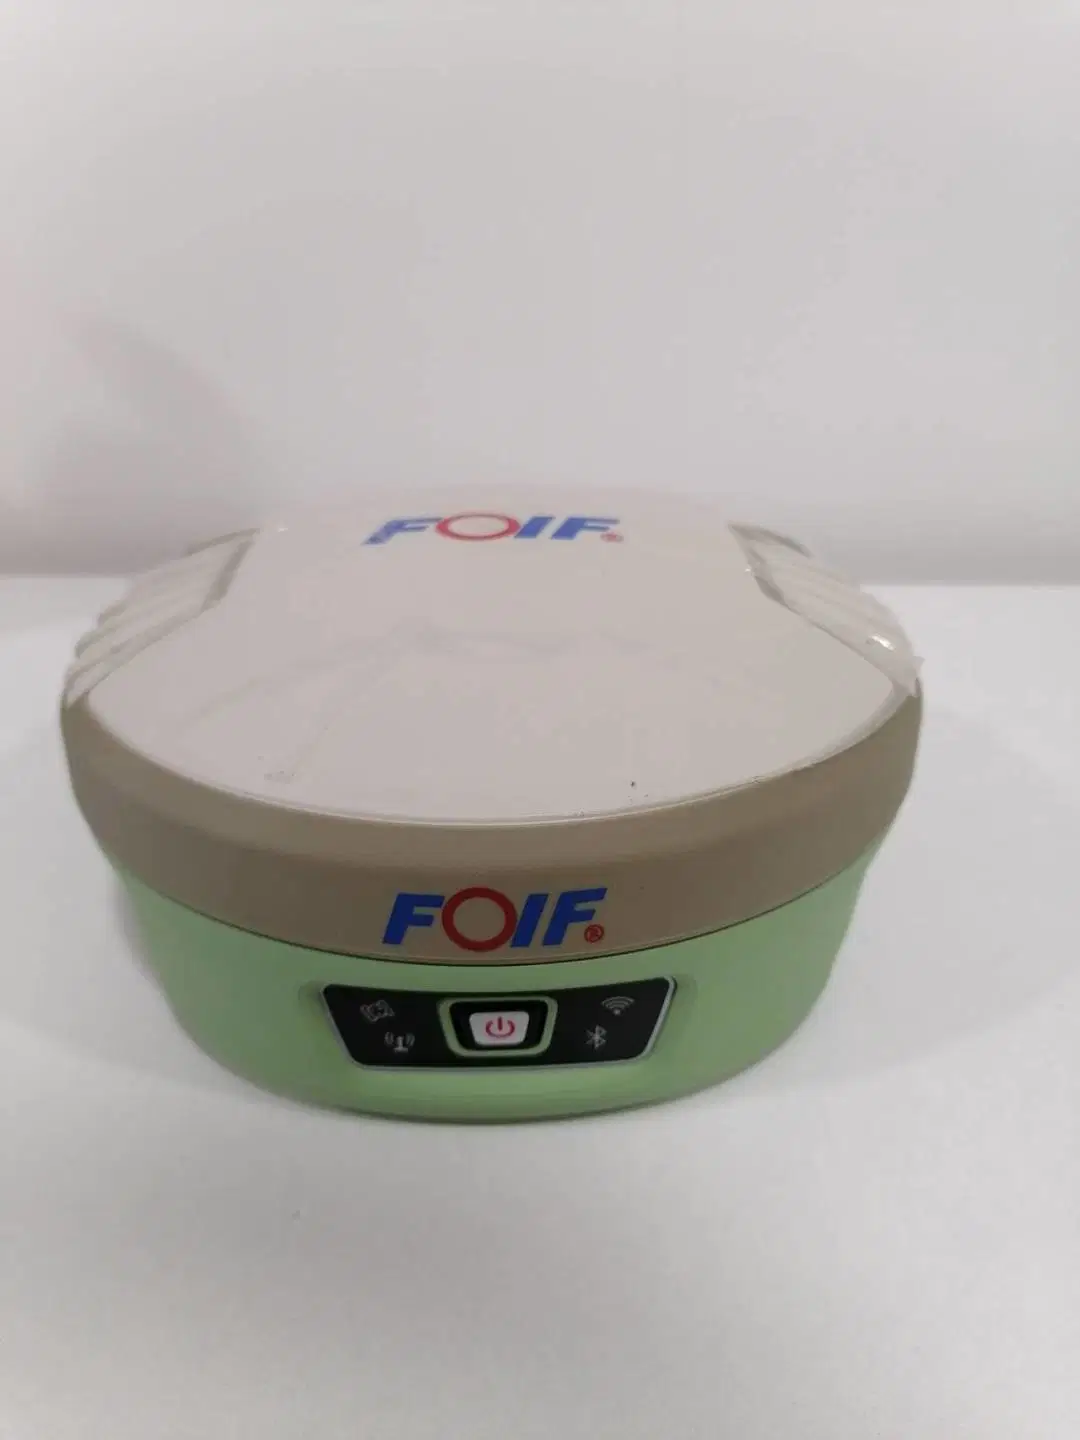 New Cheap Price Survey GPS Instrument Hemisphere GPS Gnss Rtk Base and Rover with Tilt Foif A90